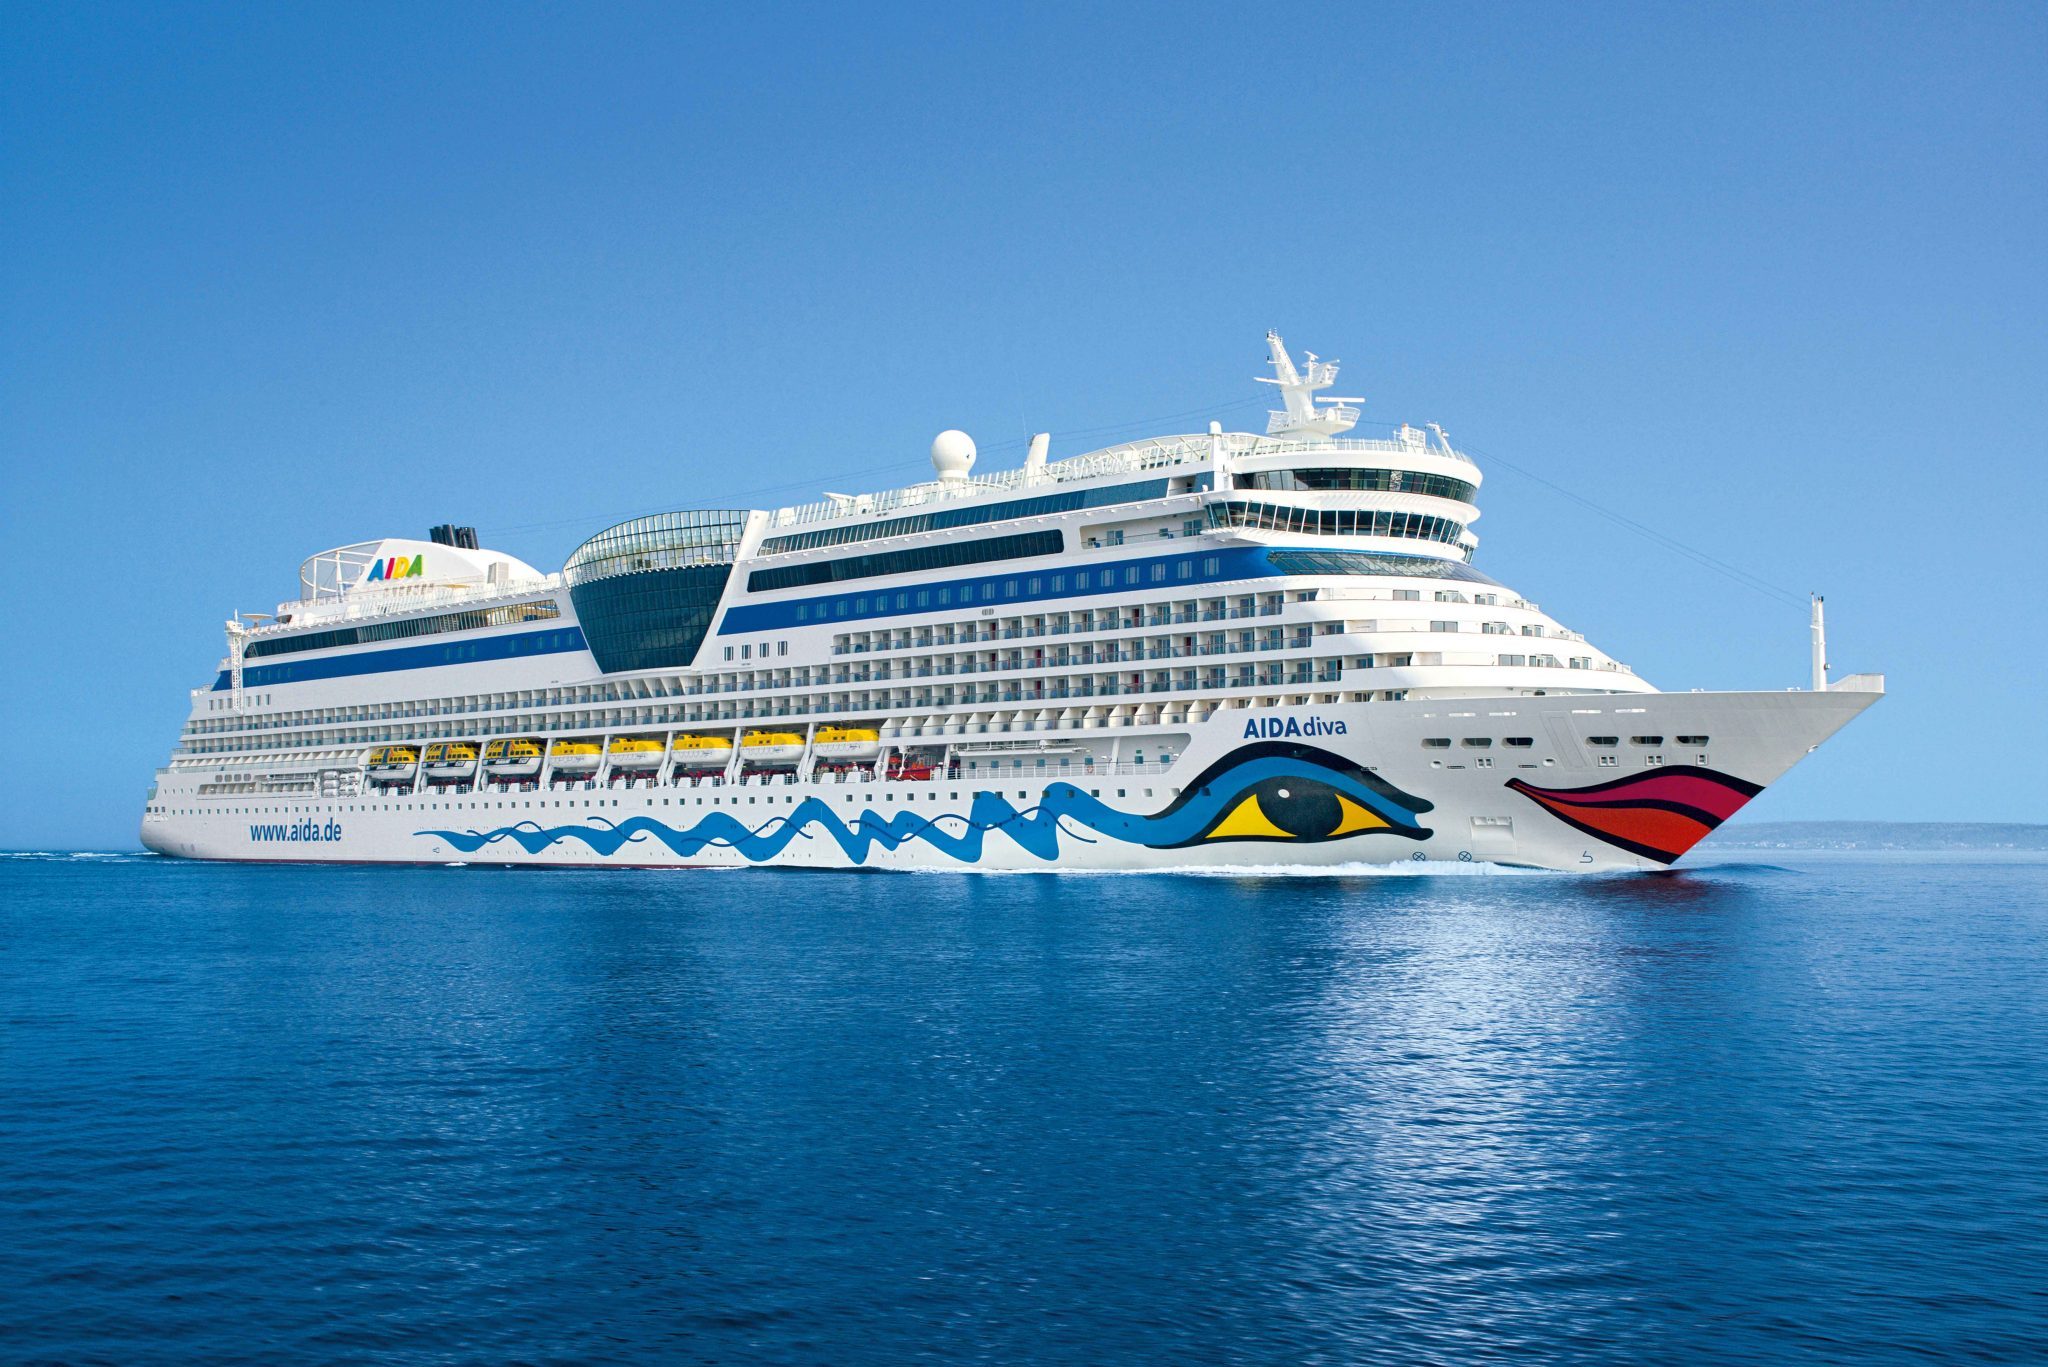 AIDA Cruises, which is part of Carnival, will restart sailings in Germany next week.